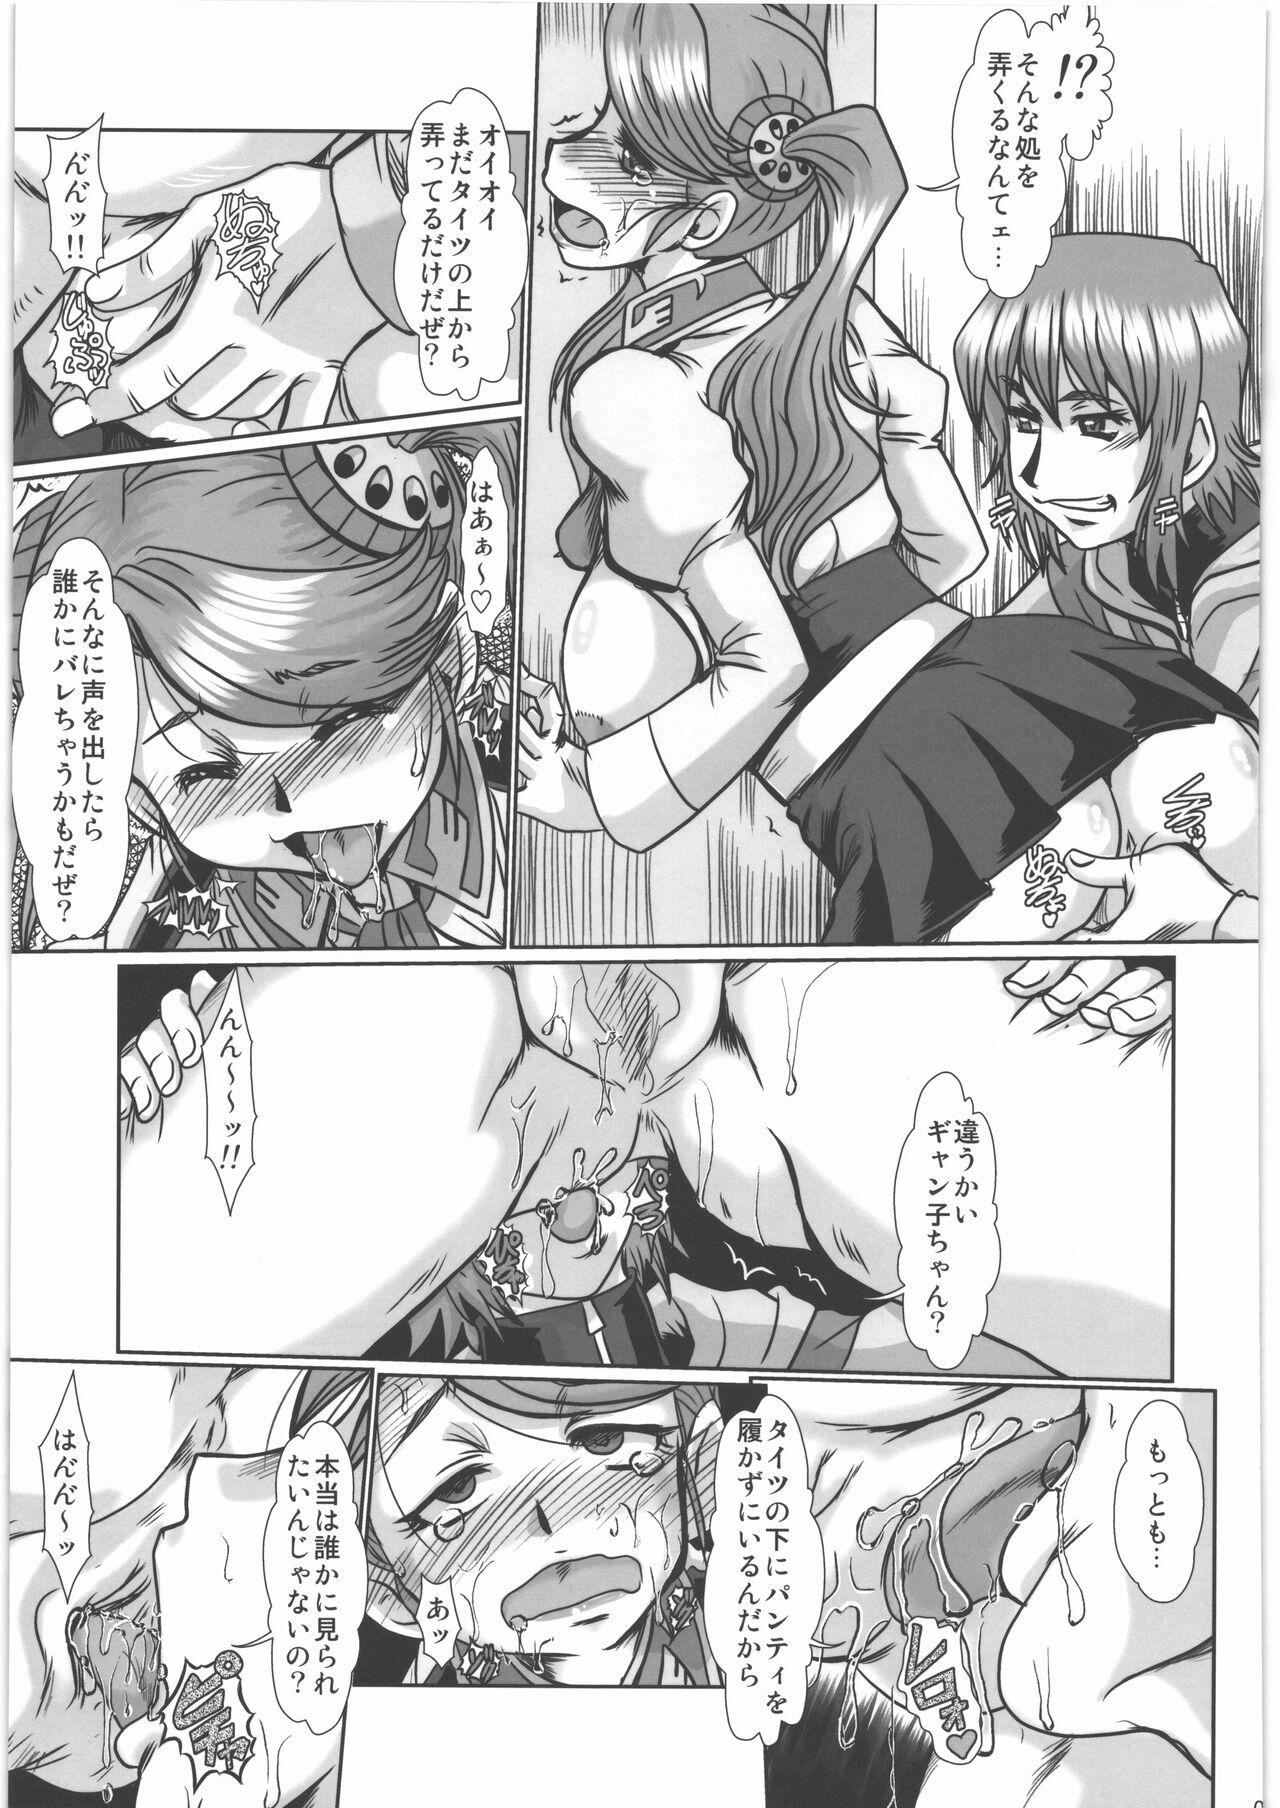 Pica F-84 - Gundam build fighters try 8teen - Page 8